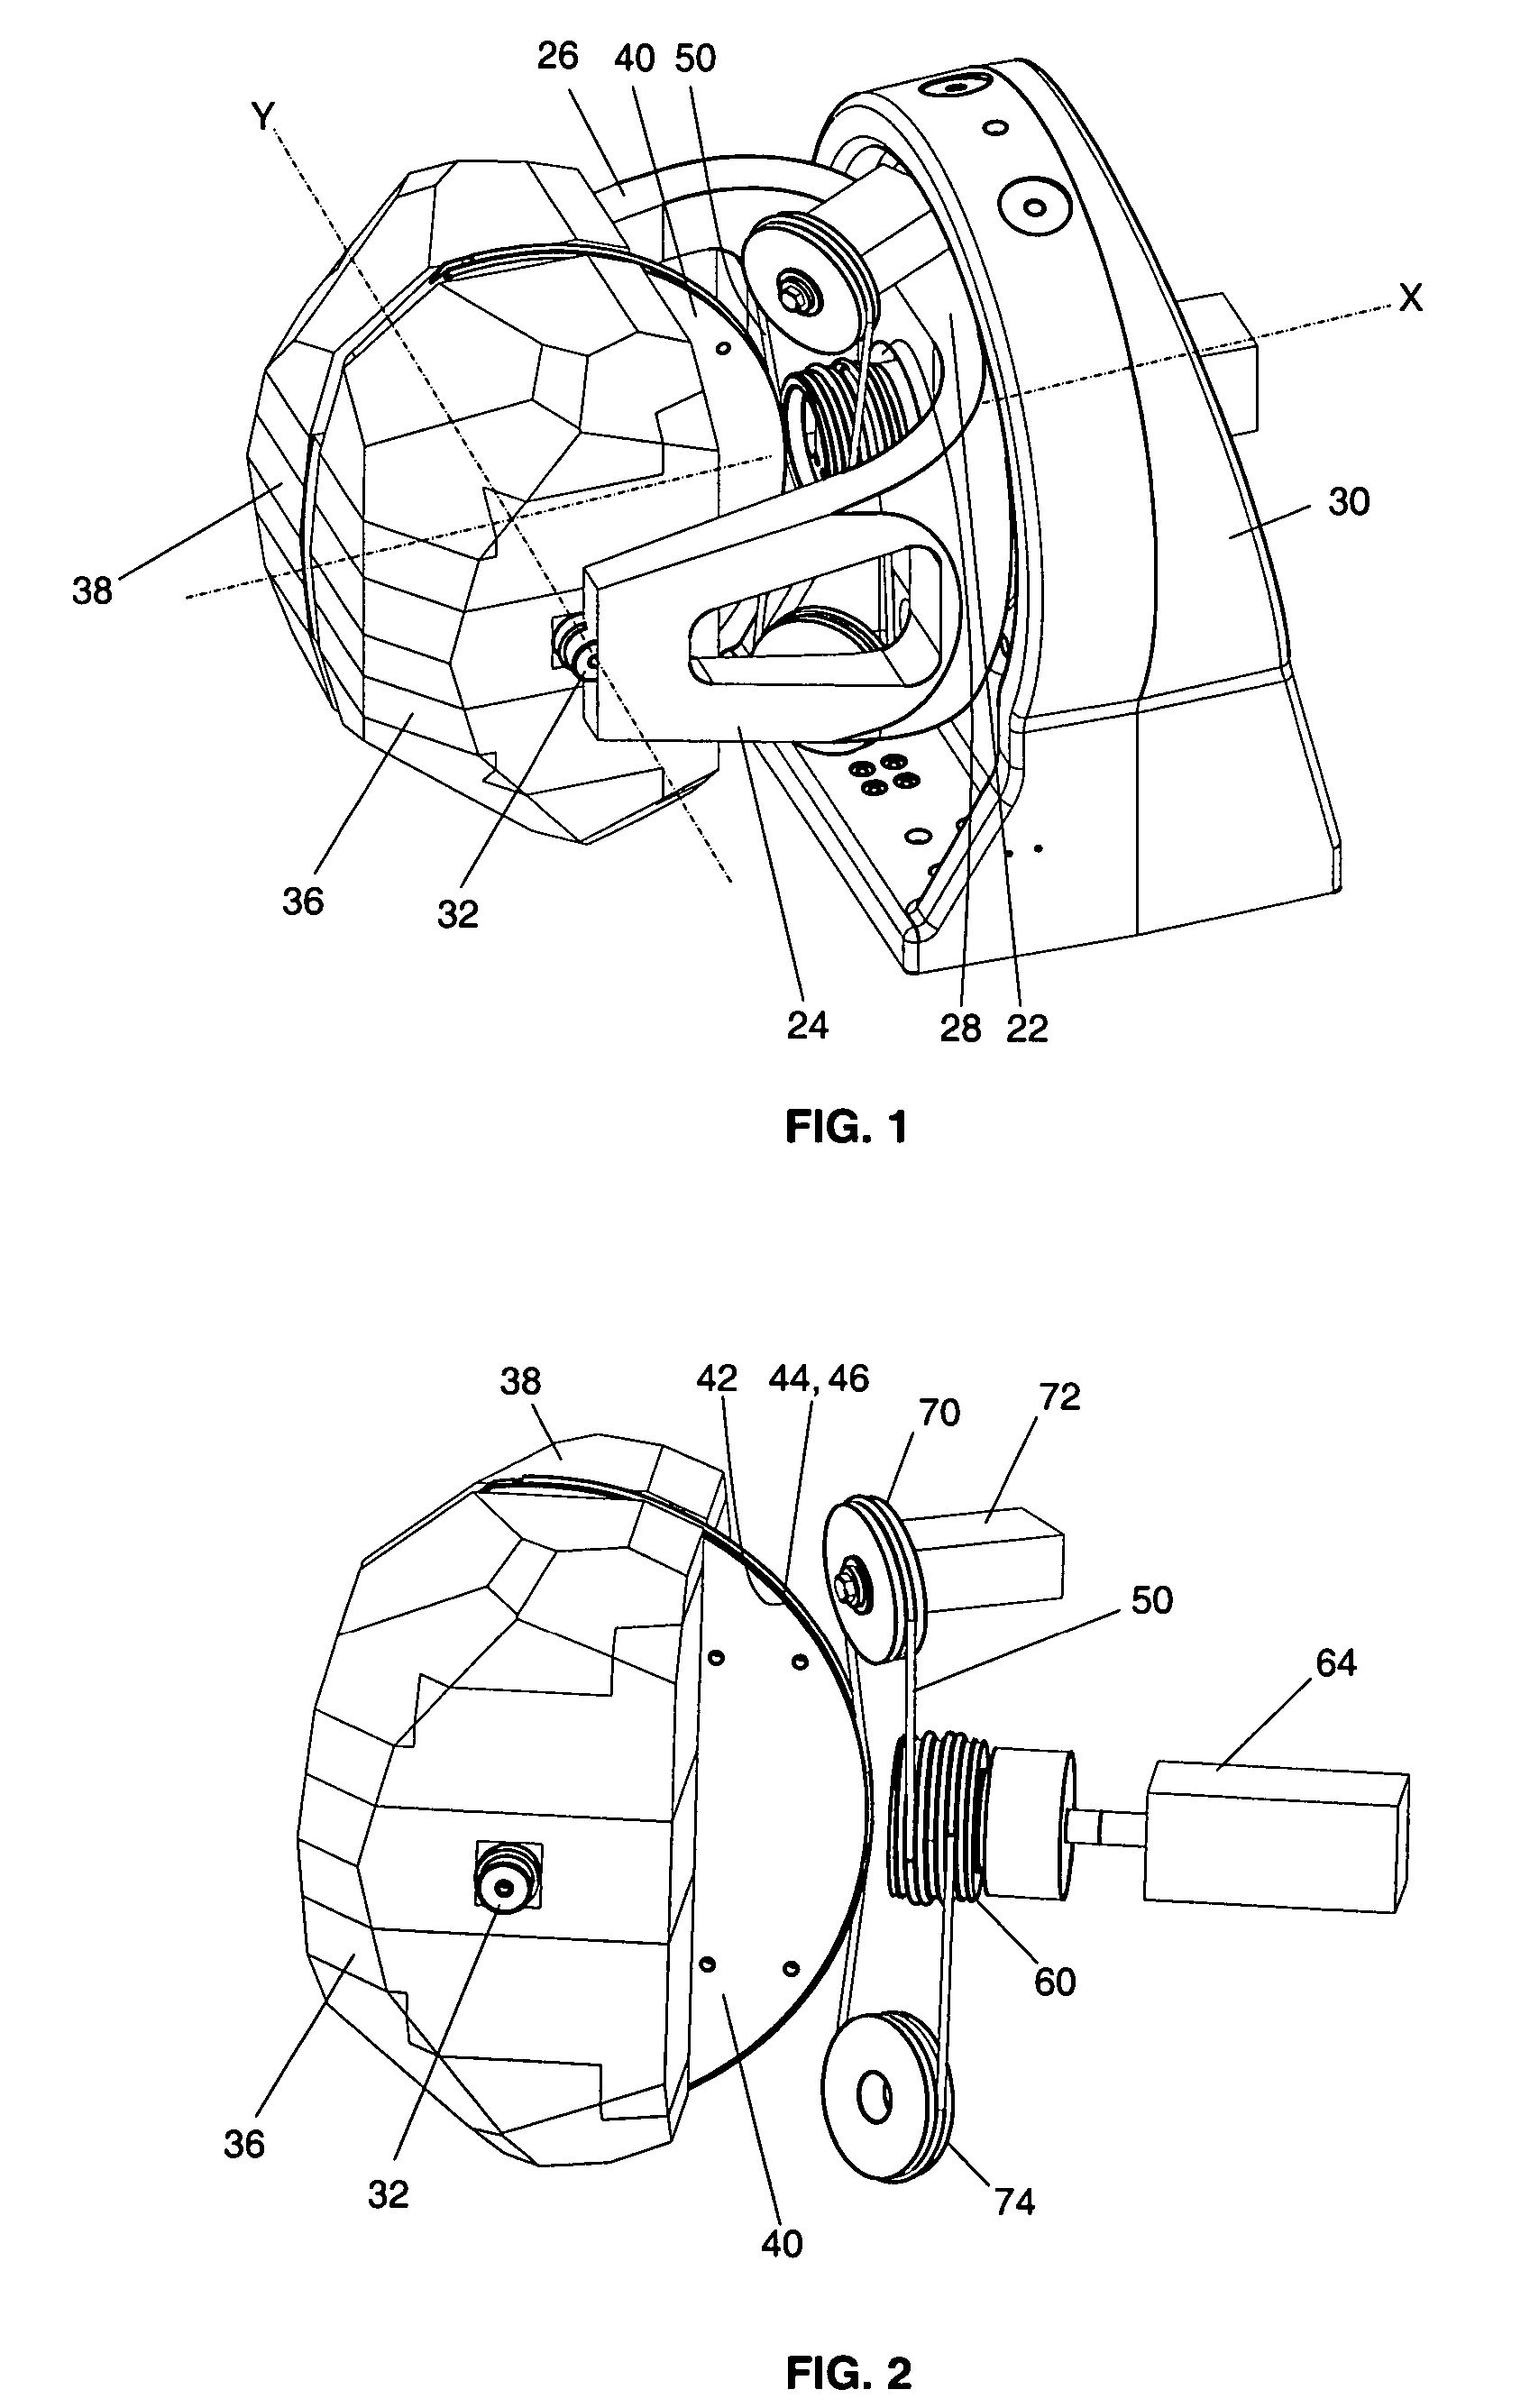 Apparatus for pivotally orienting a projection device